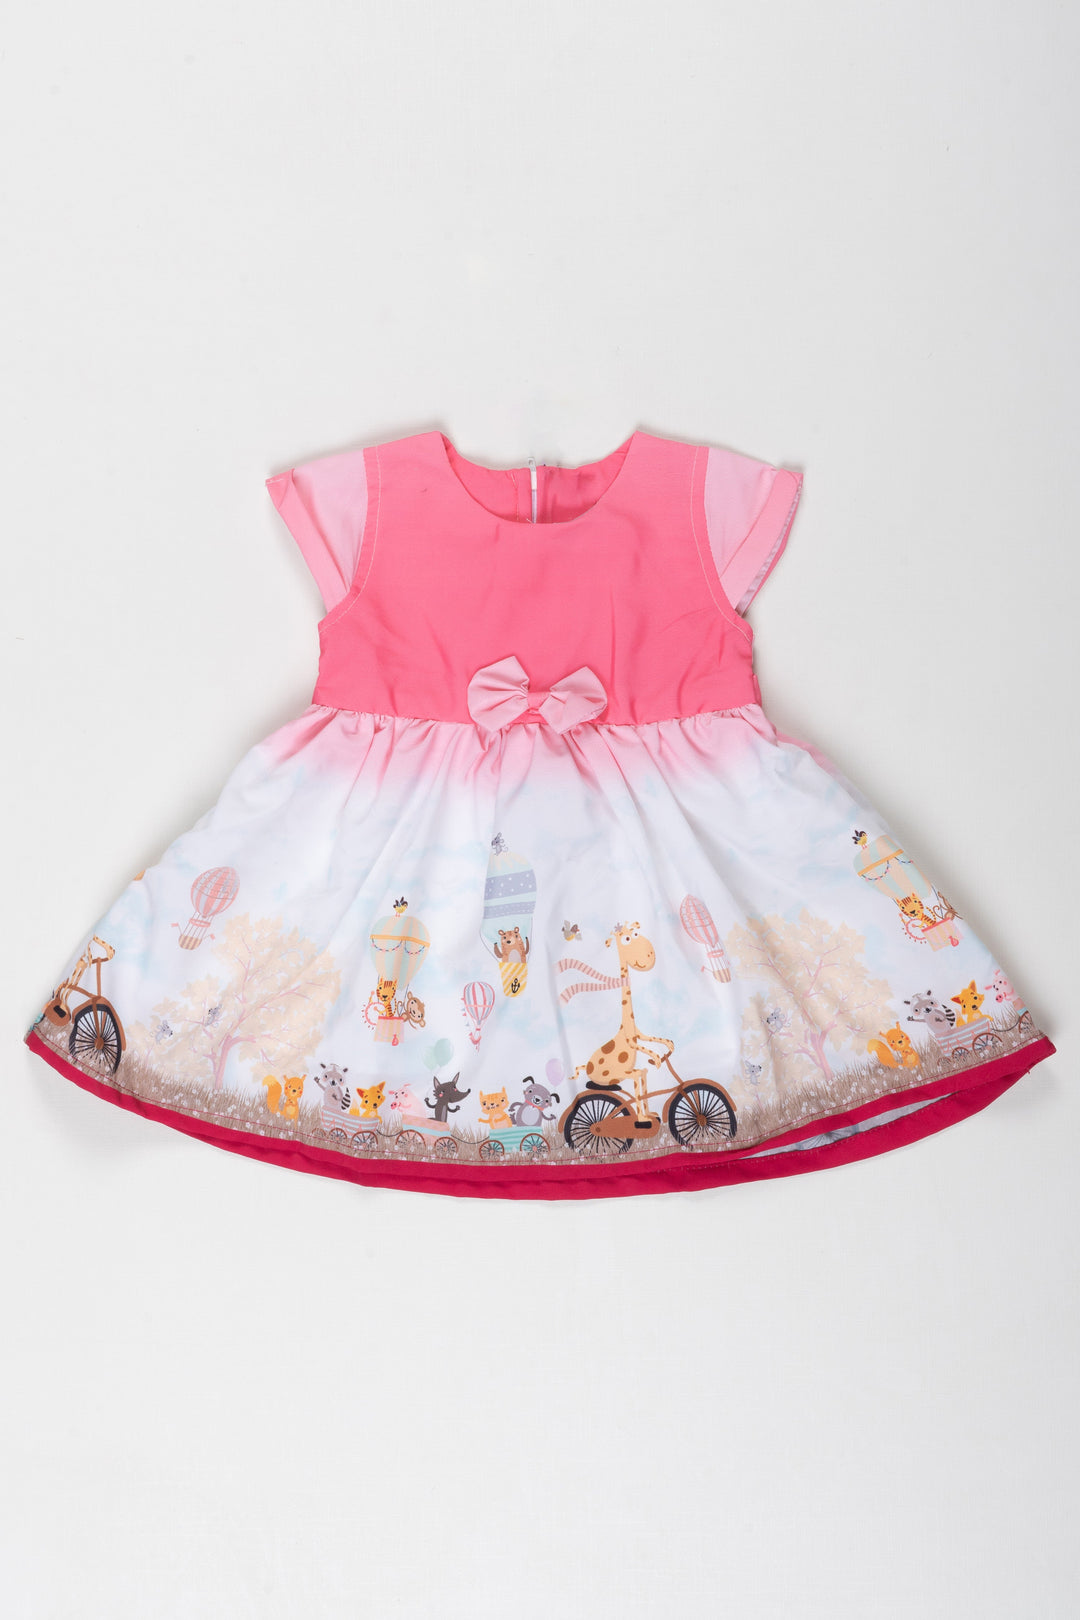 The Nesavu Baby Fancy Frock Enchanted Garden Baby Girl Frock - Pink Delight Edition Nesavu 14 (6M) / Pink / Poly Crepe BFJ546B-14 Whimsical Baby Girl Garden Print Frock | Perfect for Special Occasions | The Nesavu